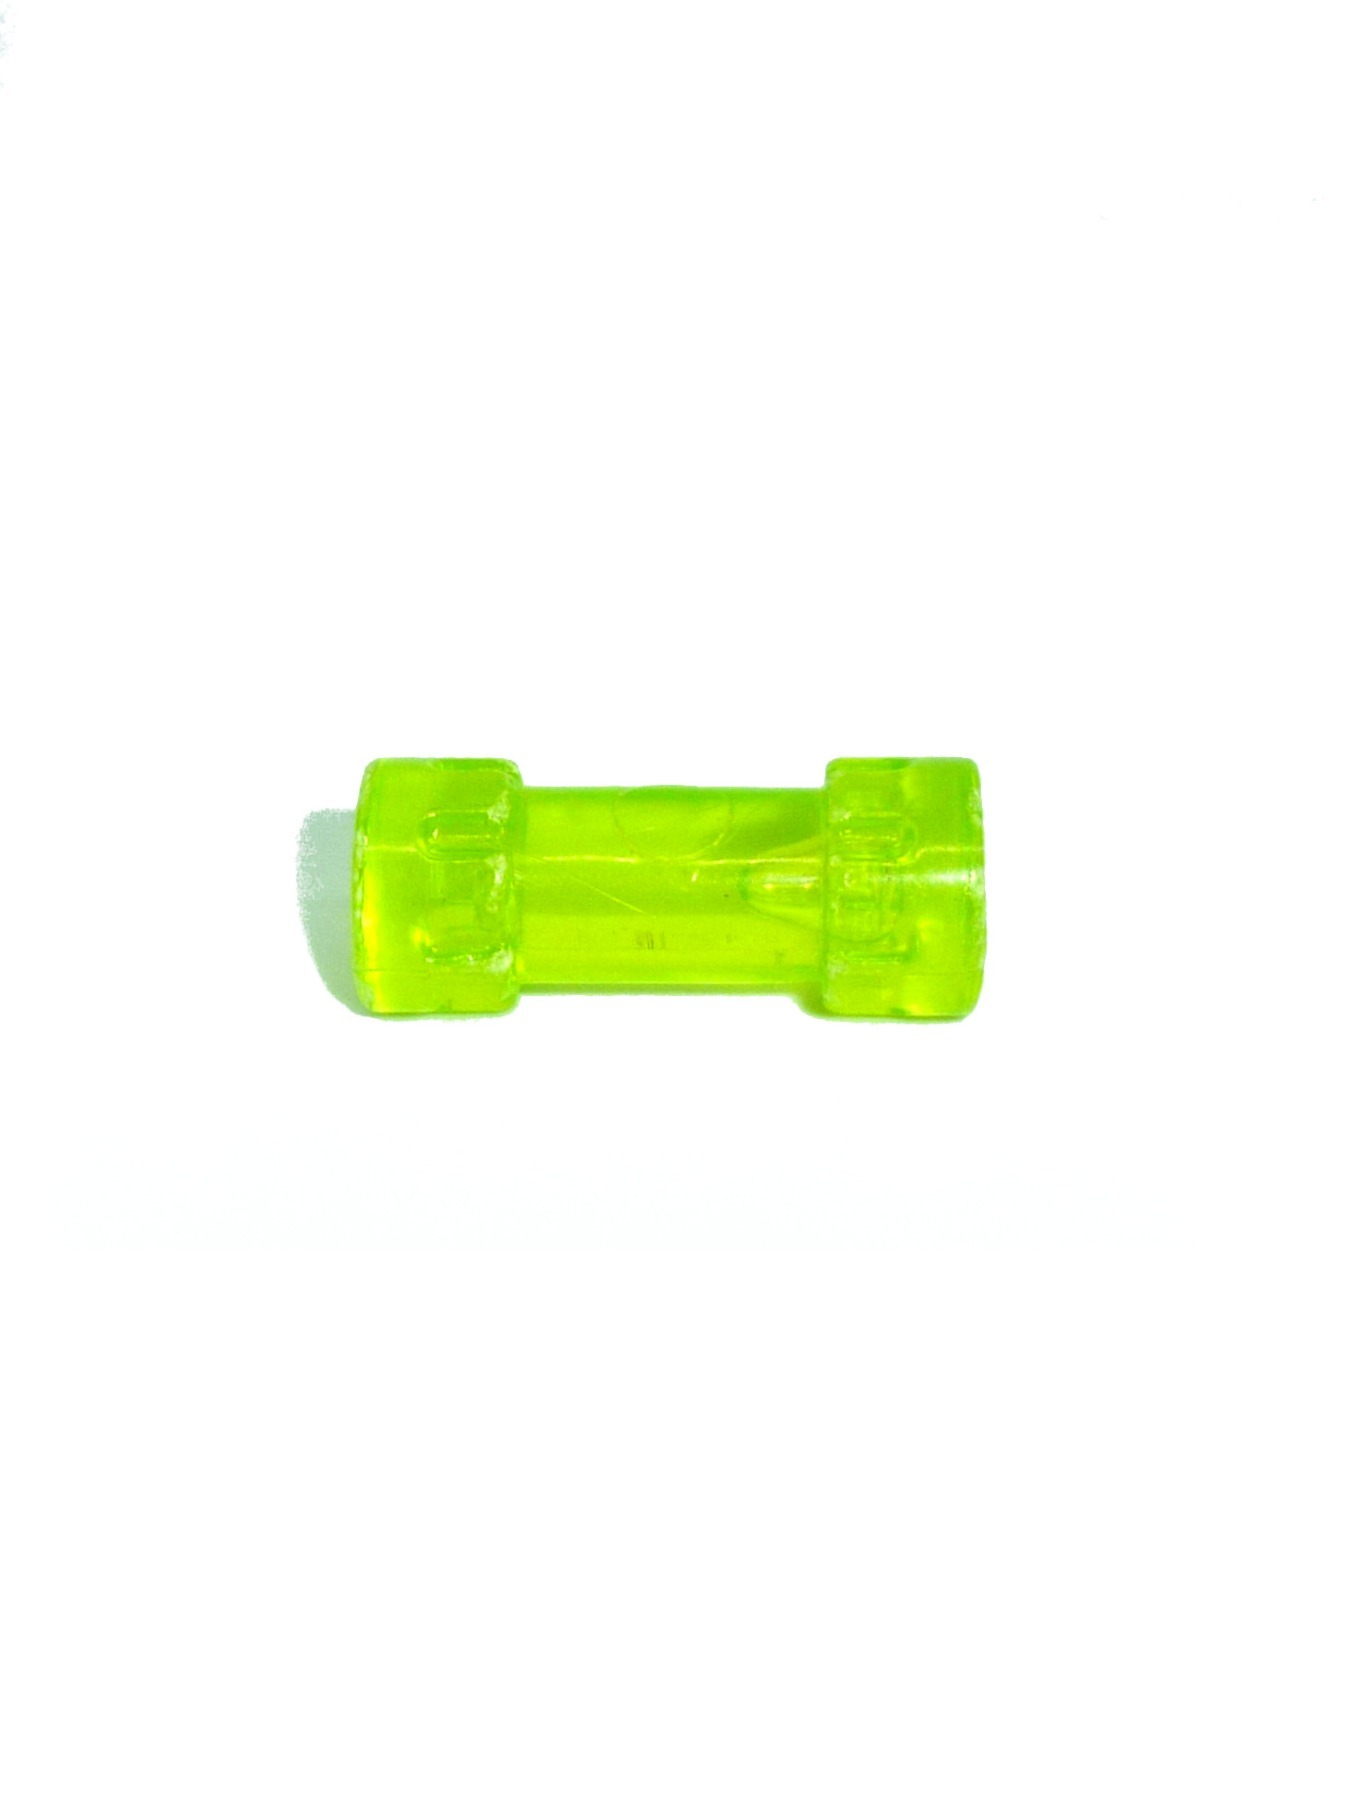 Ooze Canister / Container Mutagen - transparent green Mirage Studios / Playmates